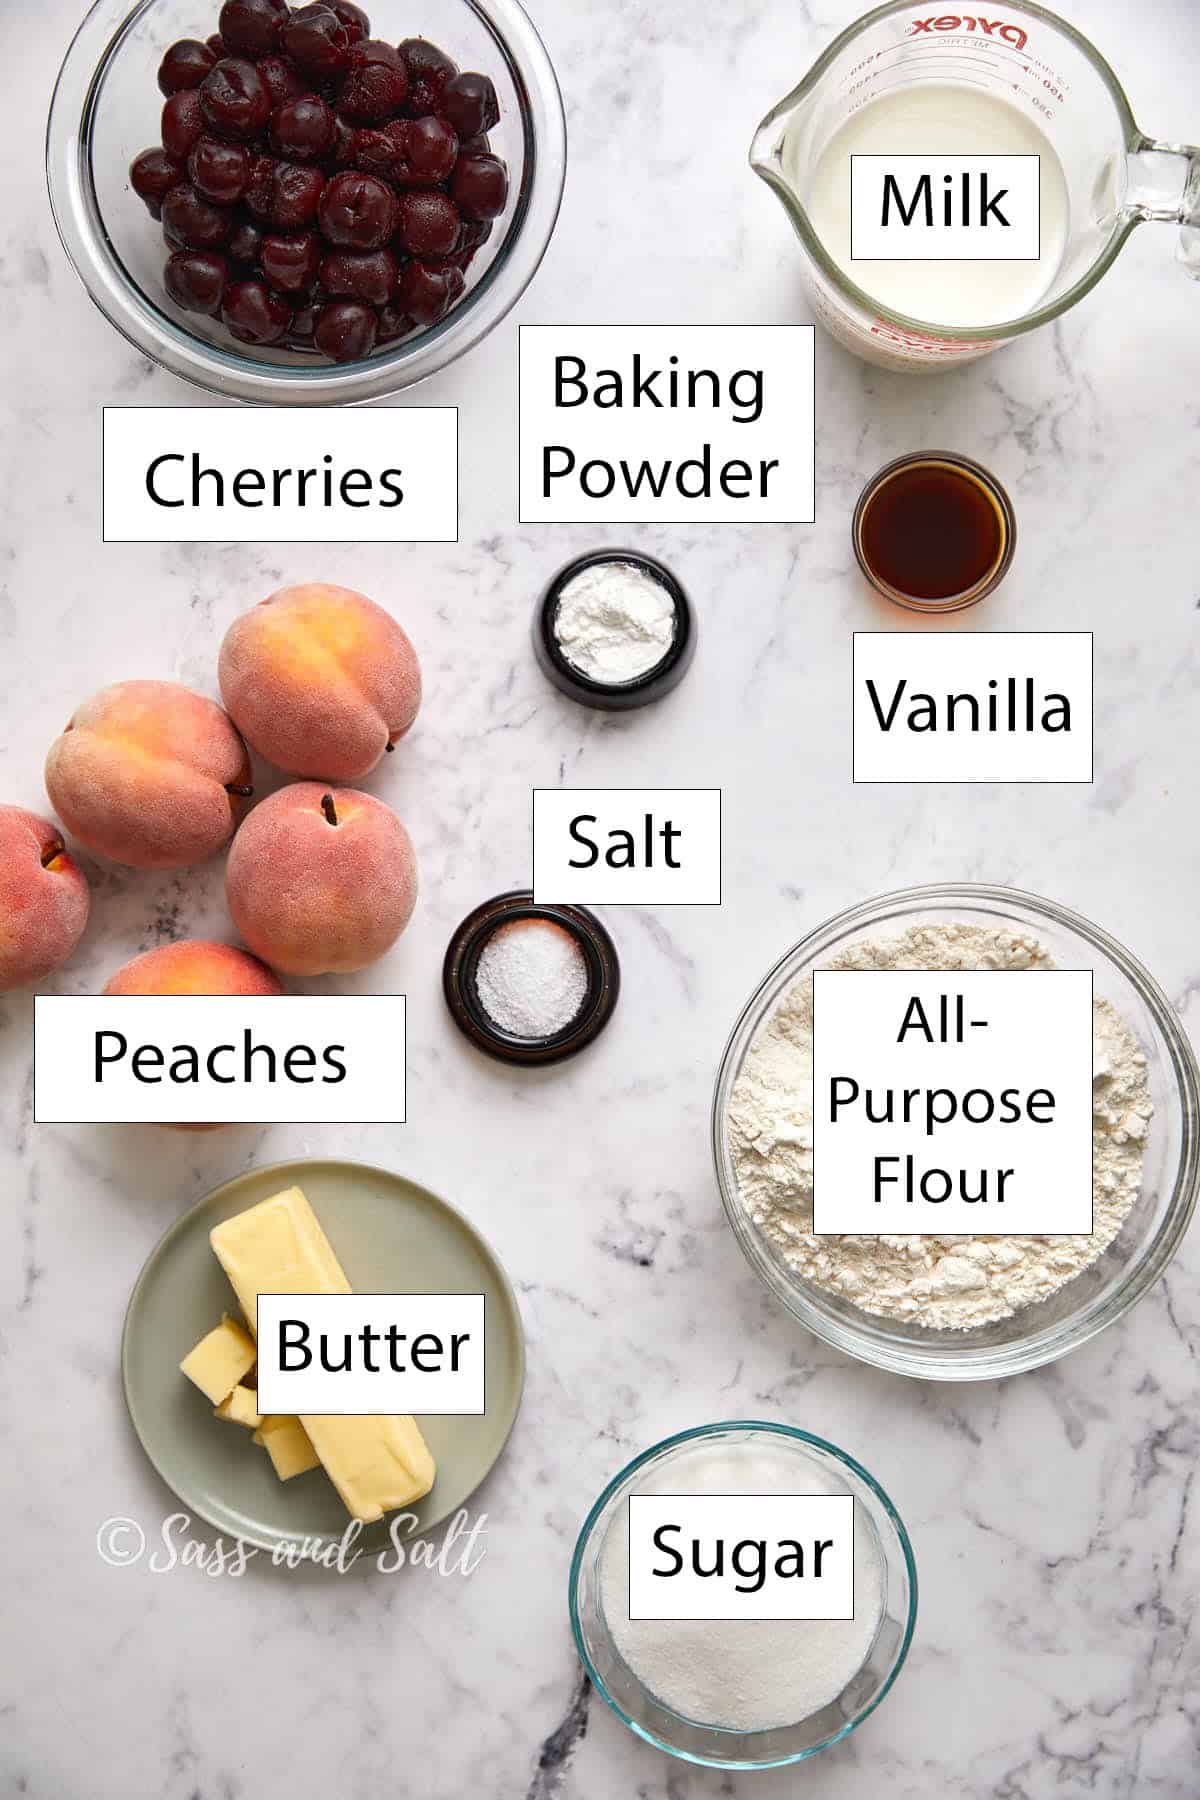 Flat lay of baking ingredients on a marble surface, labeled: cherries, peaches, butter, sugar, all-purpose flour, milk, vanilla, baking powder, and salt.